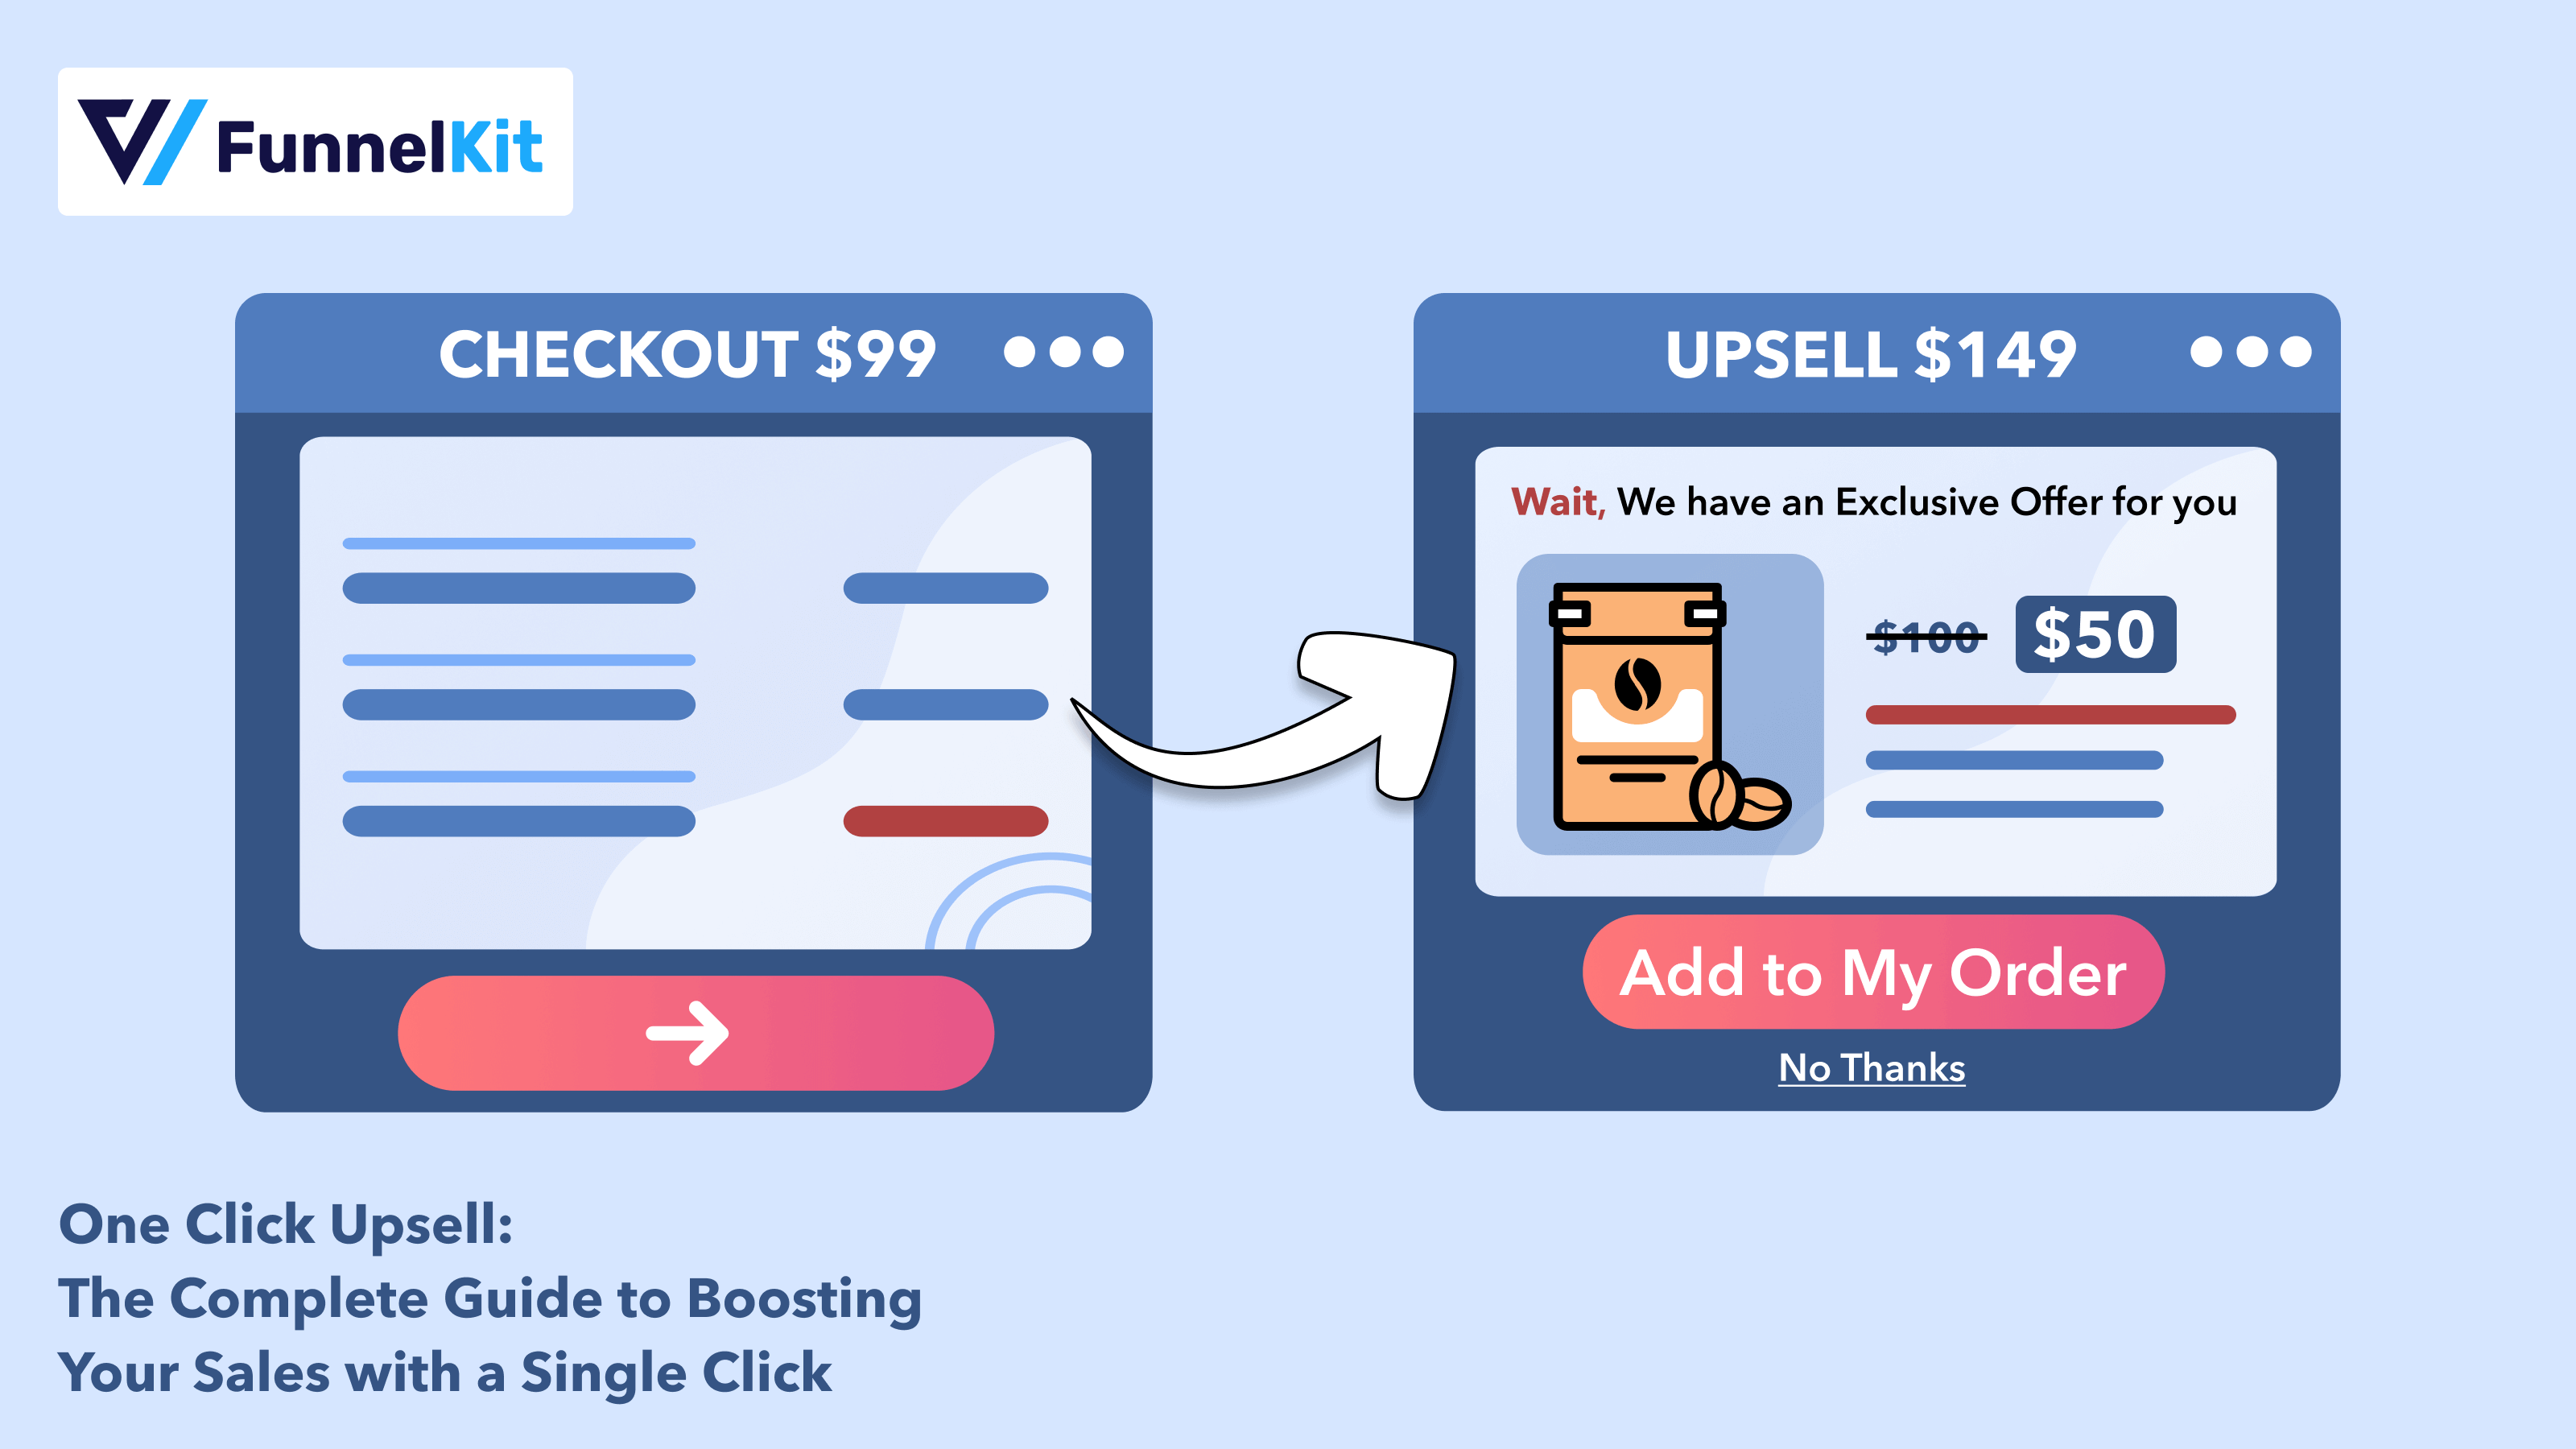 WooCommerce One Click Upsell: The Complete Guide to Boosting Your Sales with a Single Click